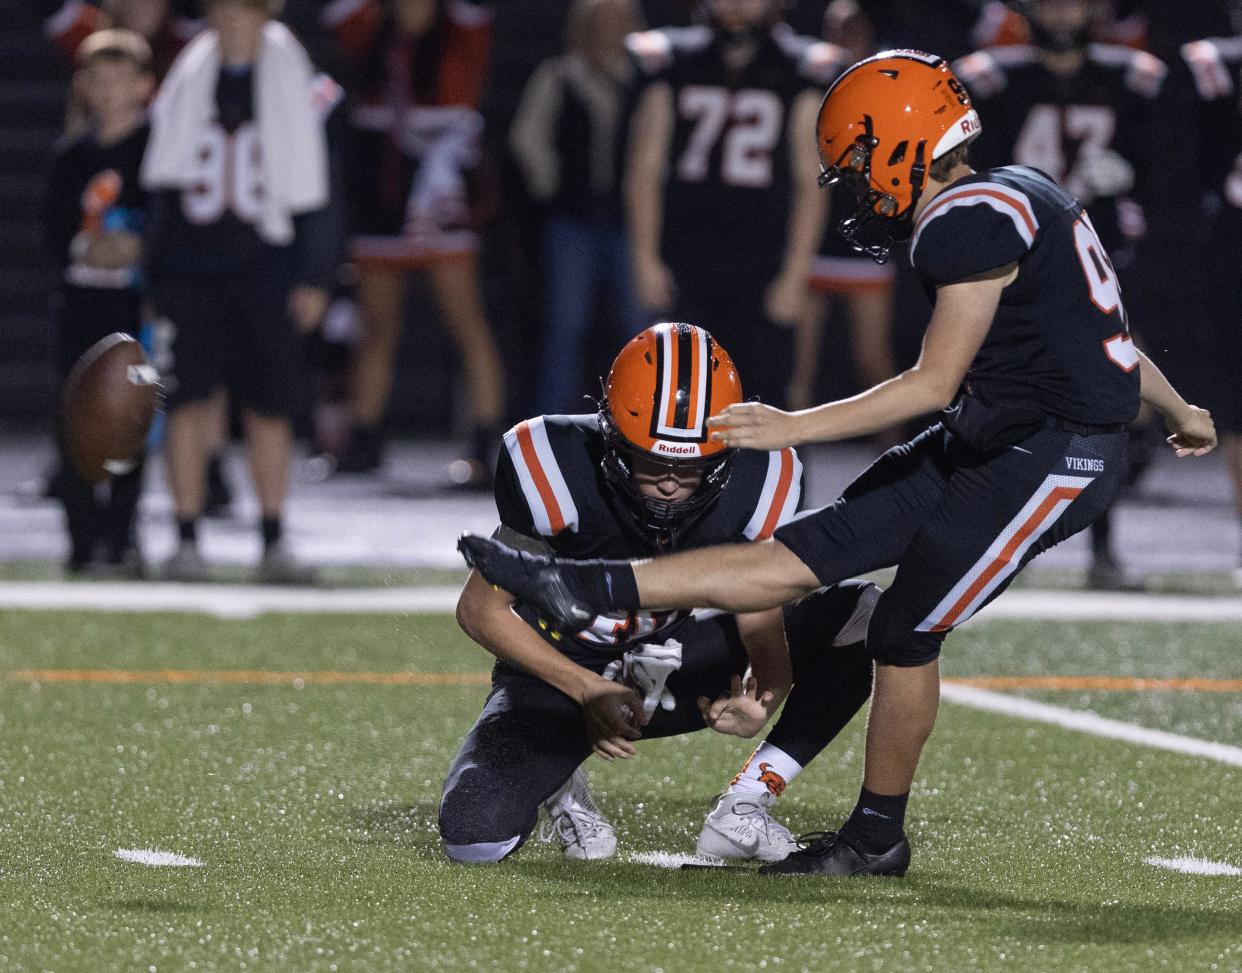 Hoover's Paul Koskovich, kicking a field goal vs. Jackson in Week 10, hit a game-winner Friday as time expired.